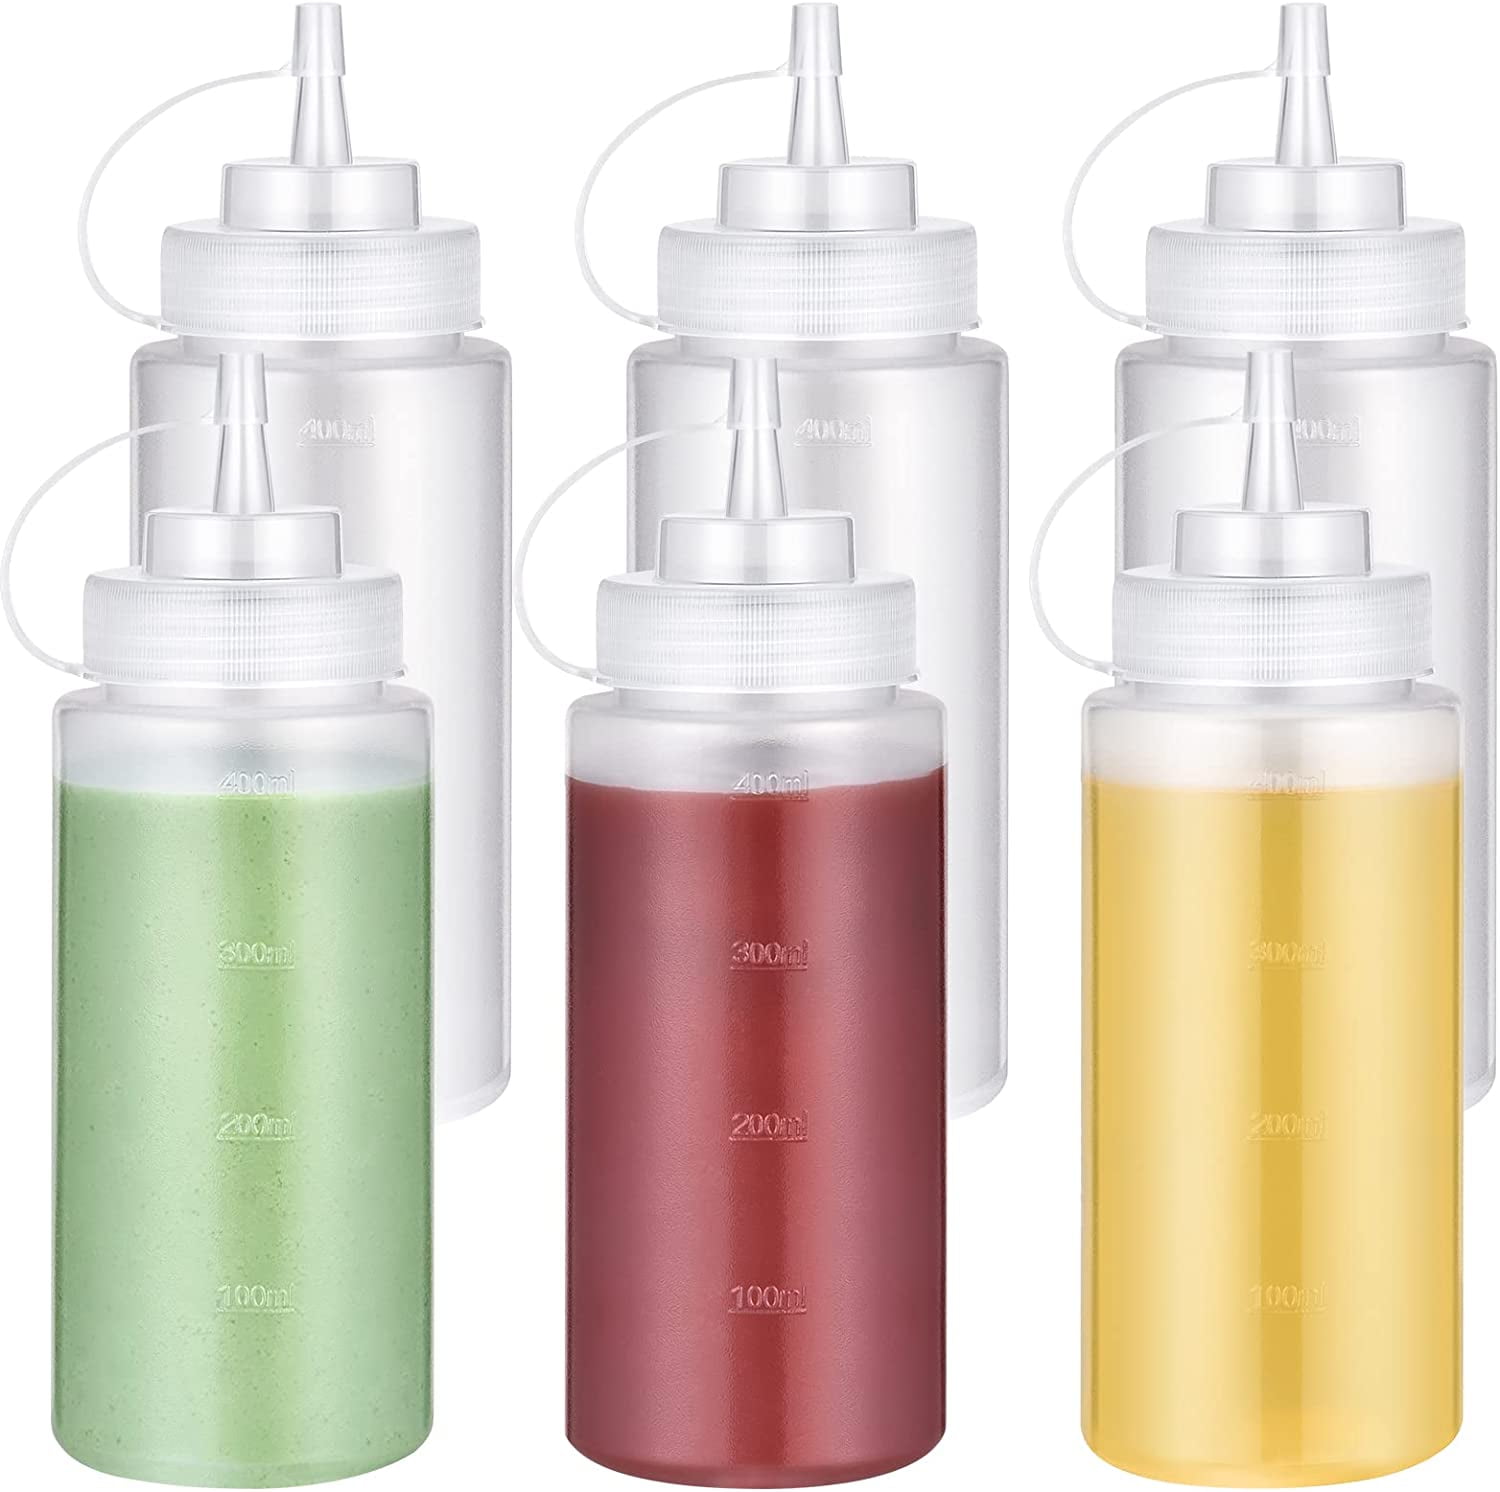 Webake 2oz Salad Dressing Container to Go, 5 Pack Condiment Squeeze Bottles  Silicone Sauce Bottles w…See more Webake 2oz Salad Dressing Container to